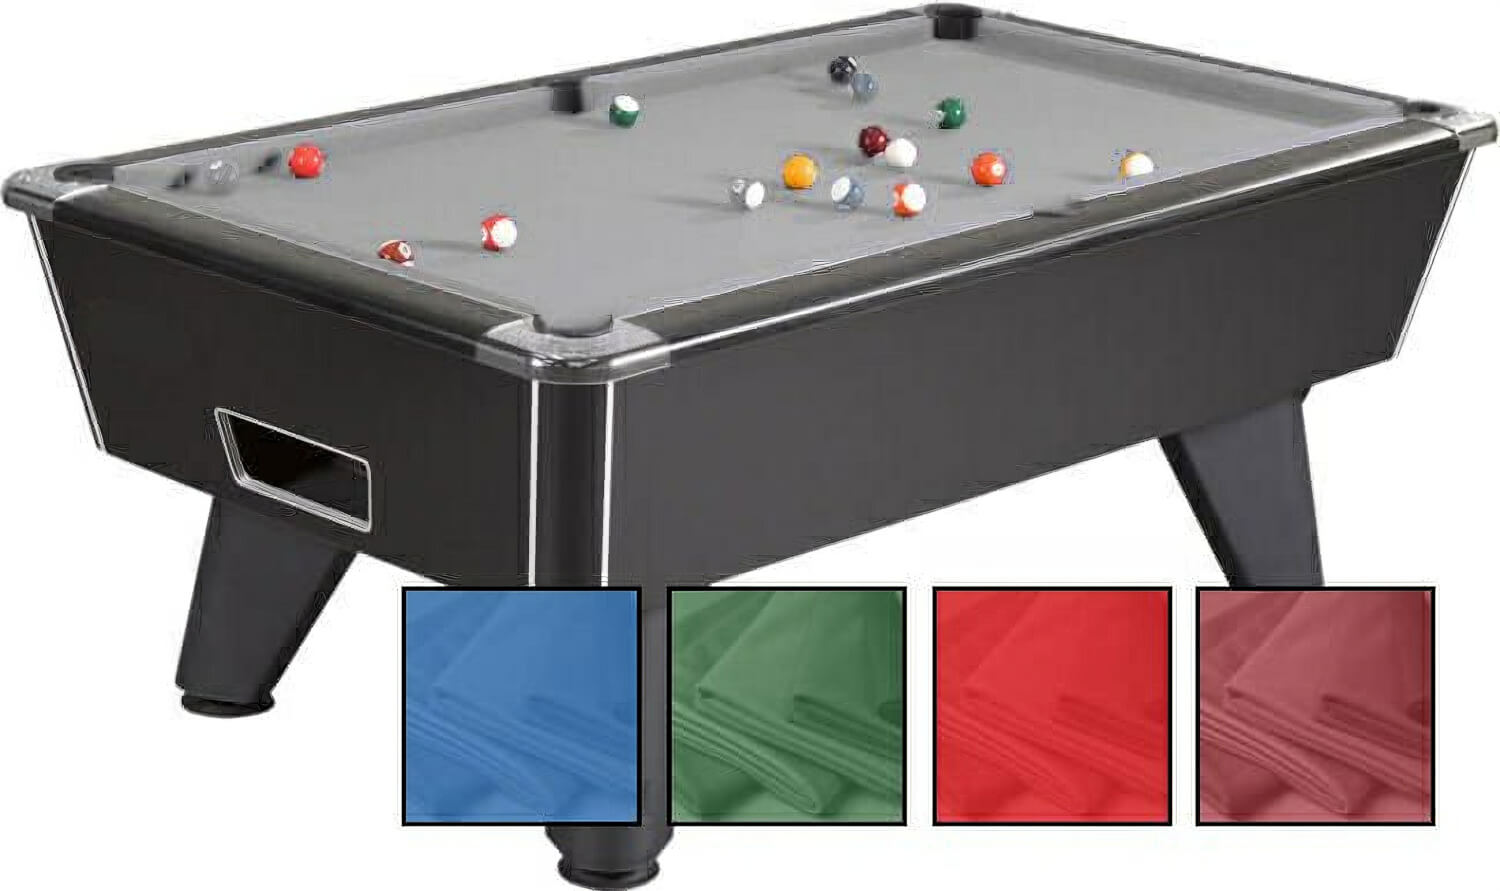 6ft pool table for sale